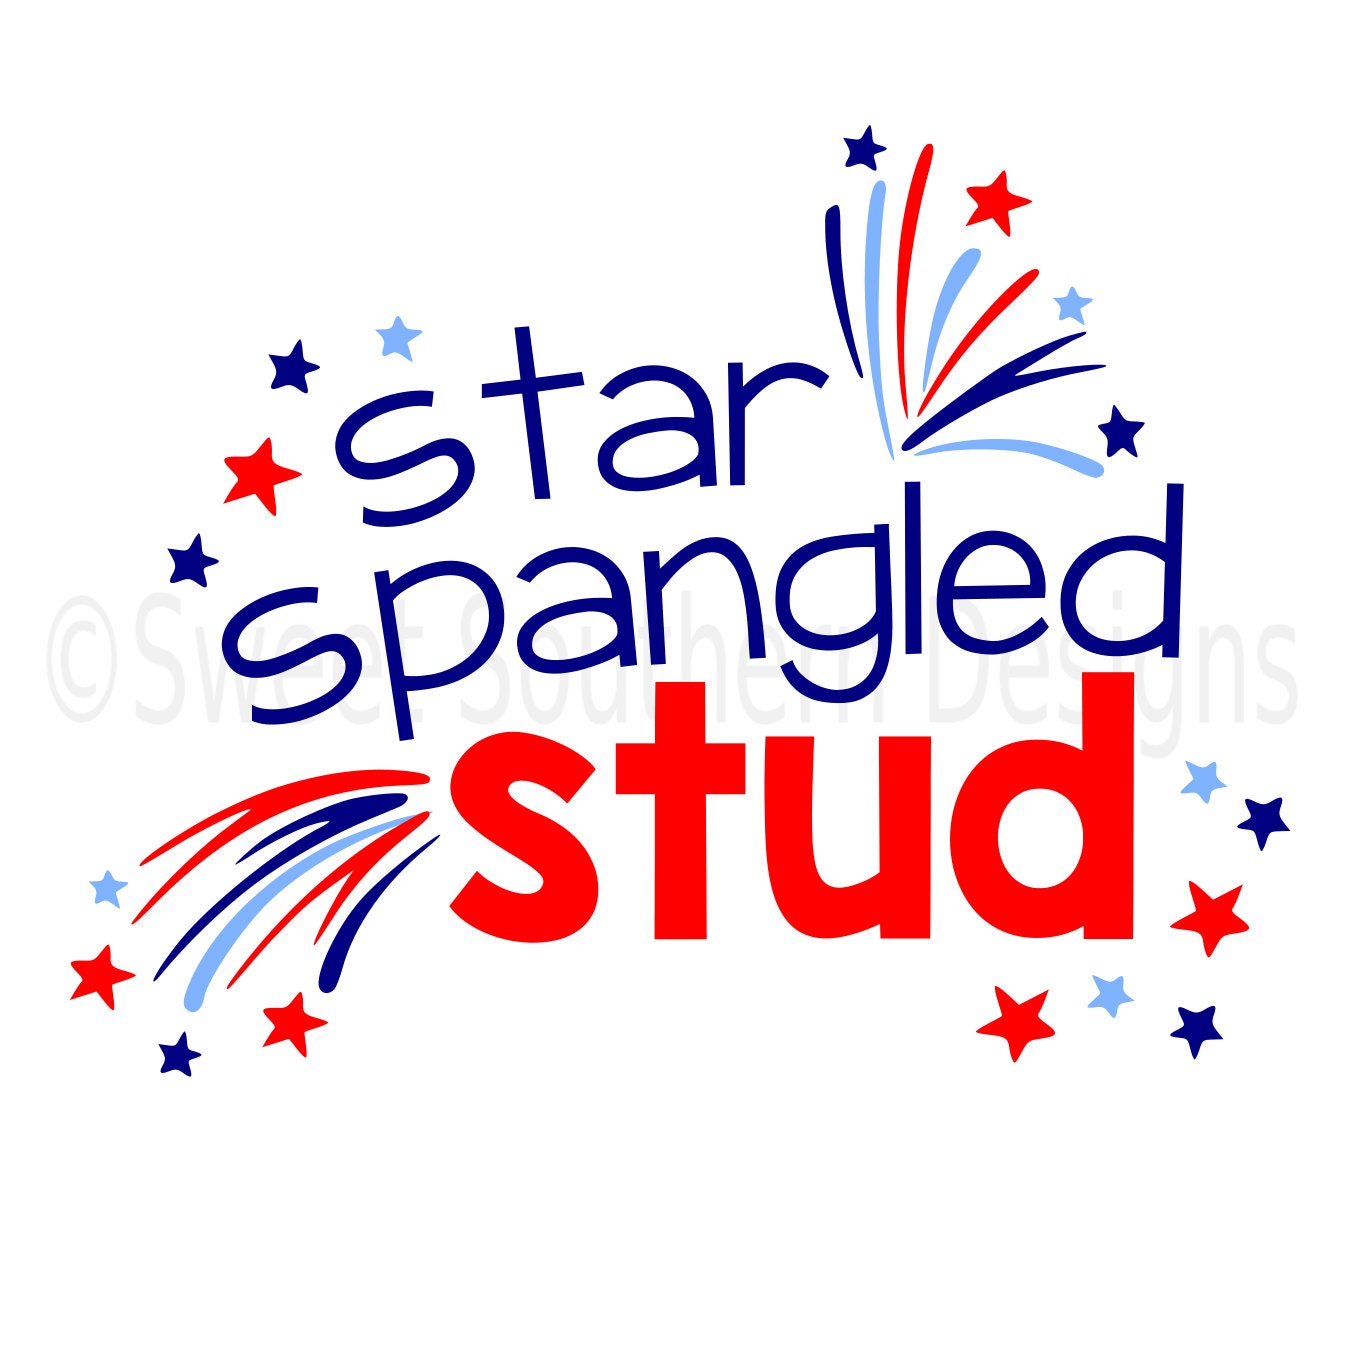 Download Star spangled stud boys fourth of July Memorial Day SVG